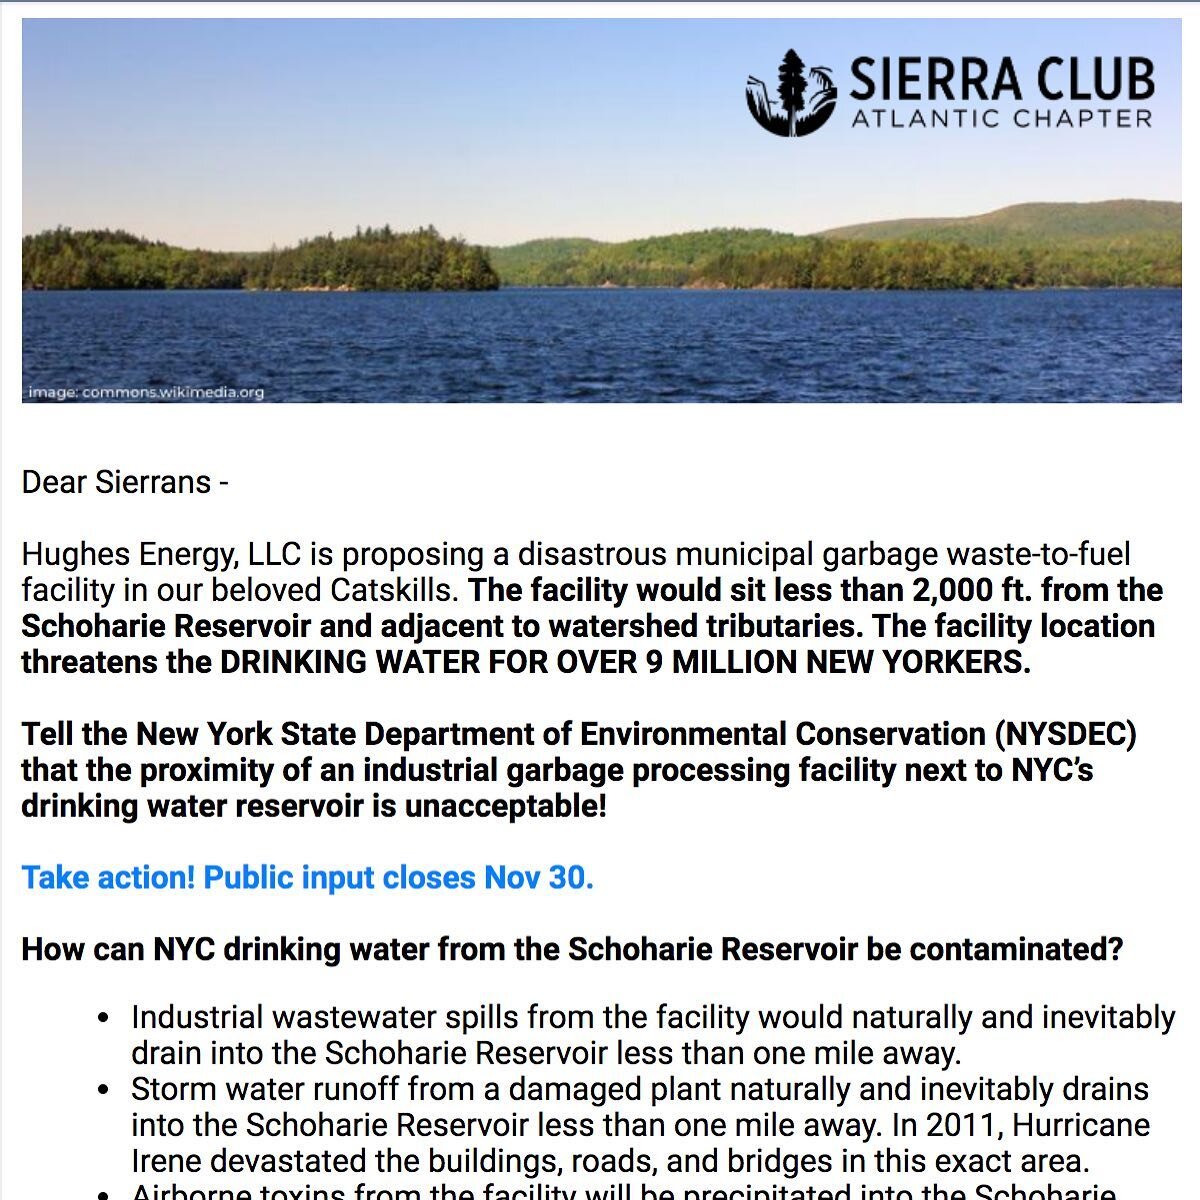 Many thanks to @sierraclubatlantic for helping us spread the word for our cause. 🙏💗 Grateful to be in connection with so many land and environmental advocates.